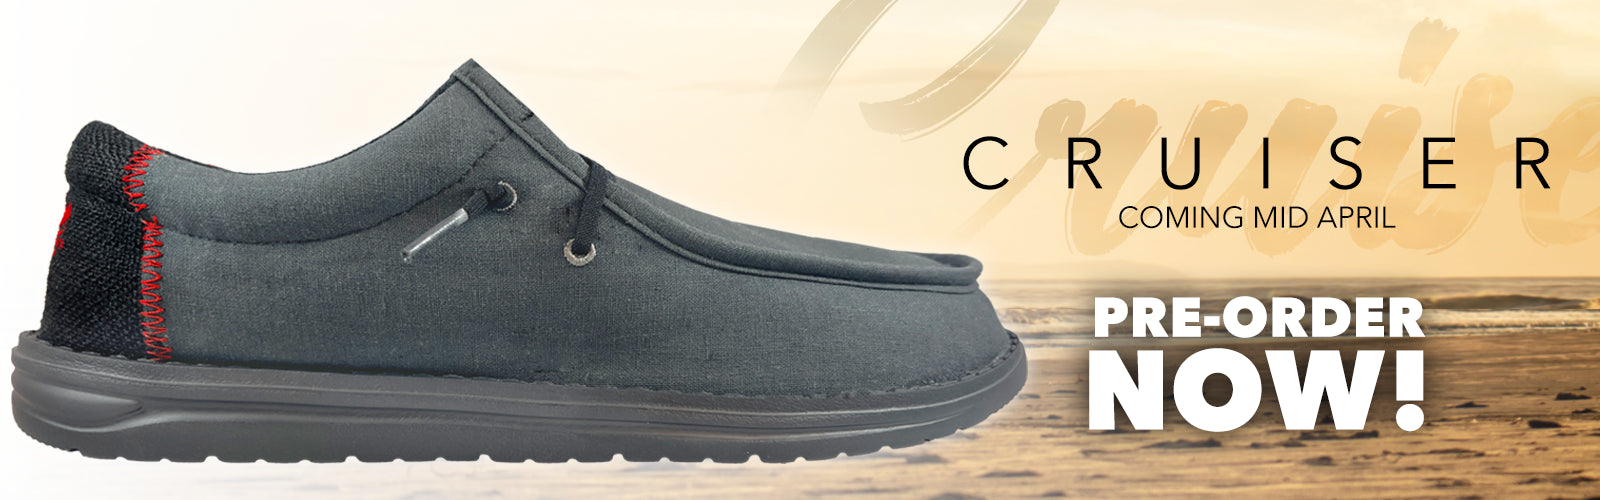 The Snap-on Cruiser casual shoe is coming VERY soon!